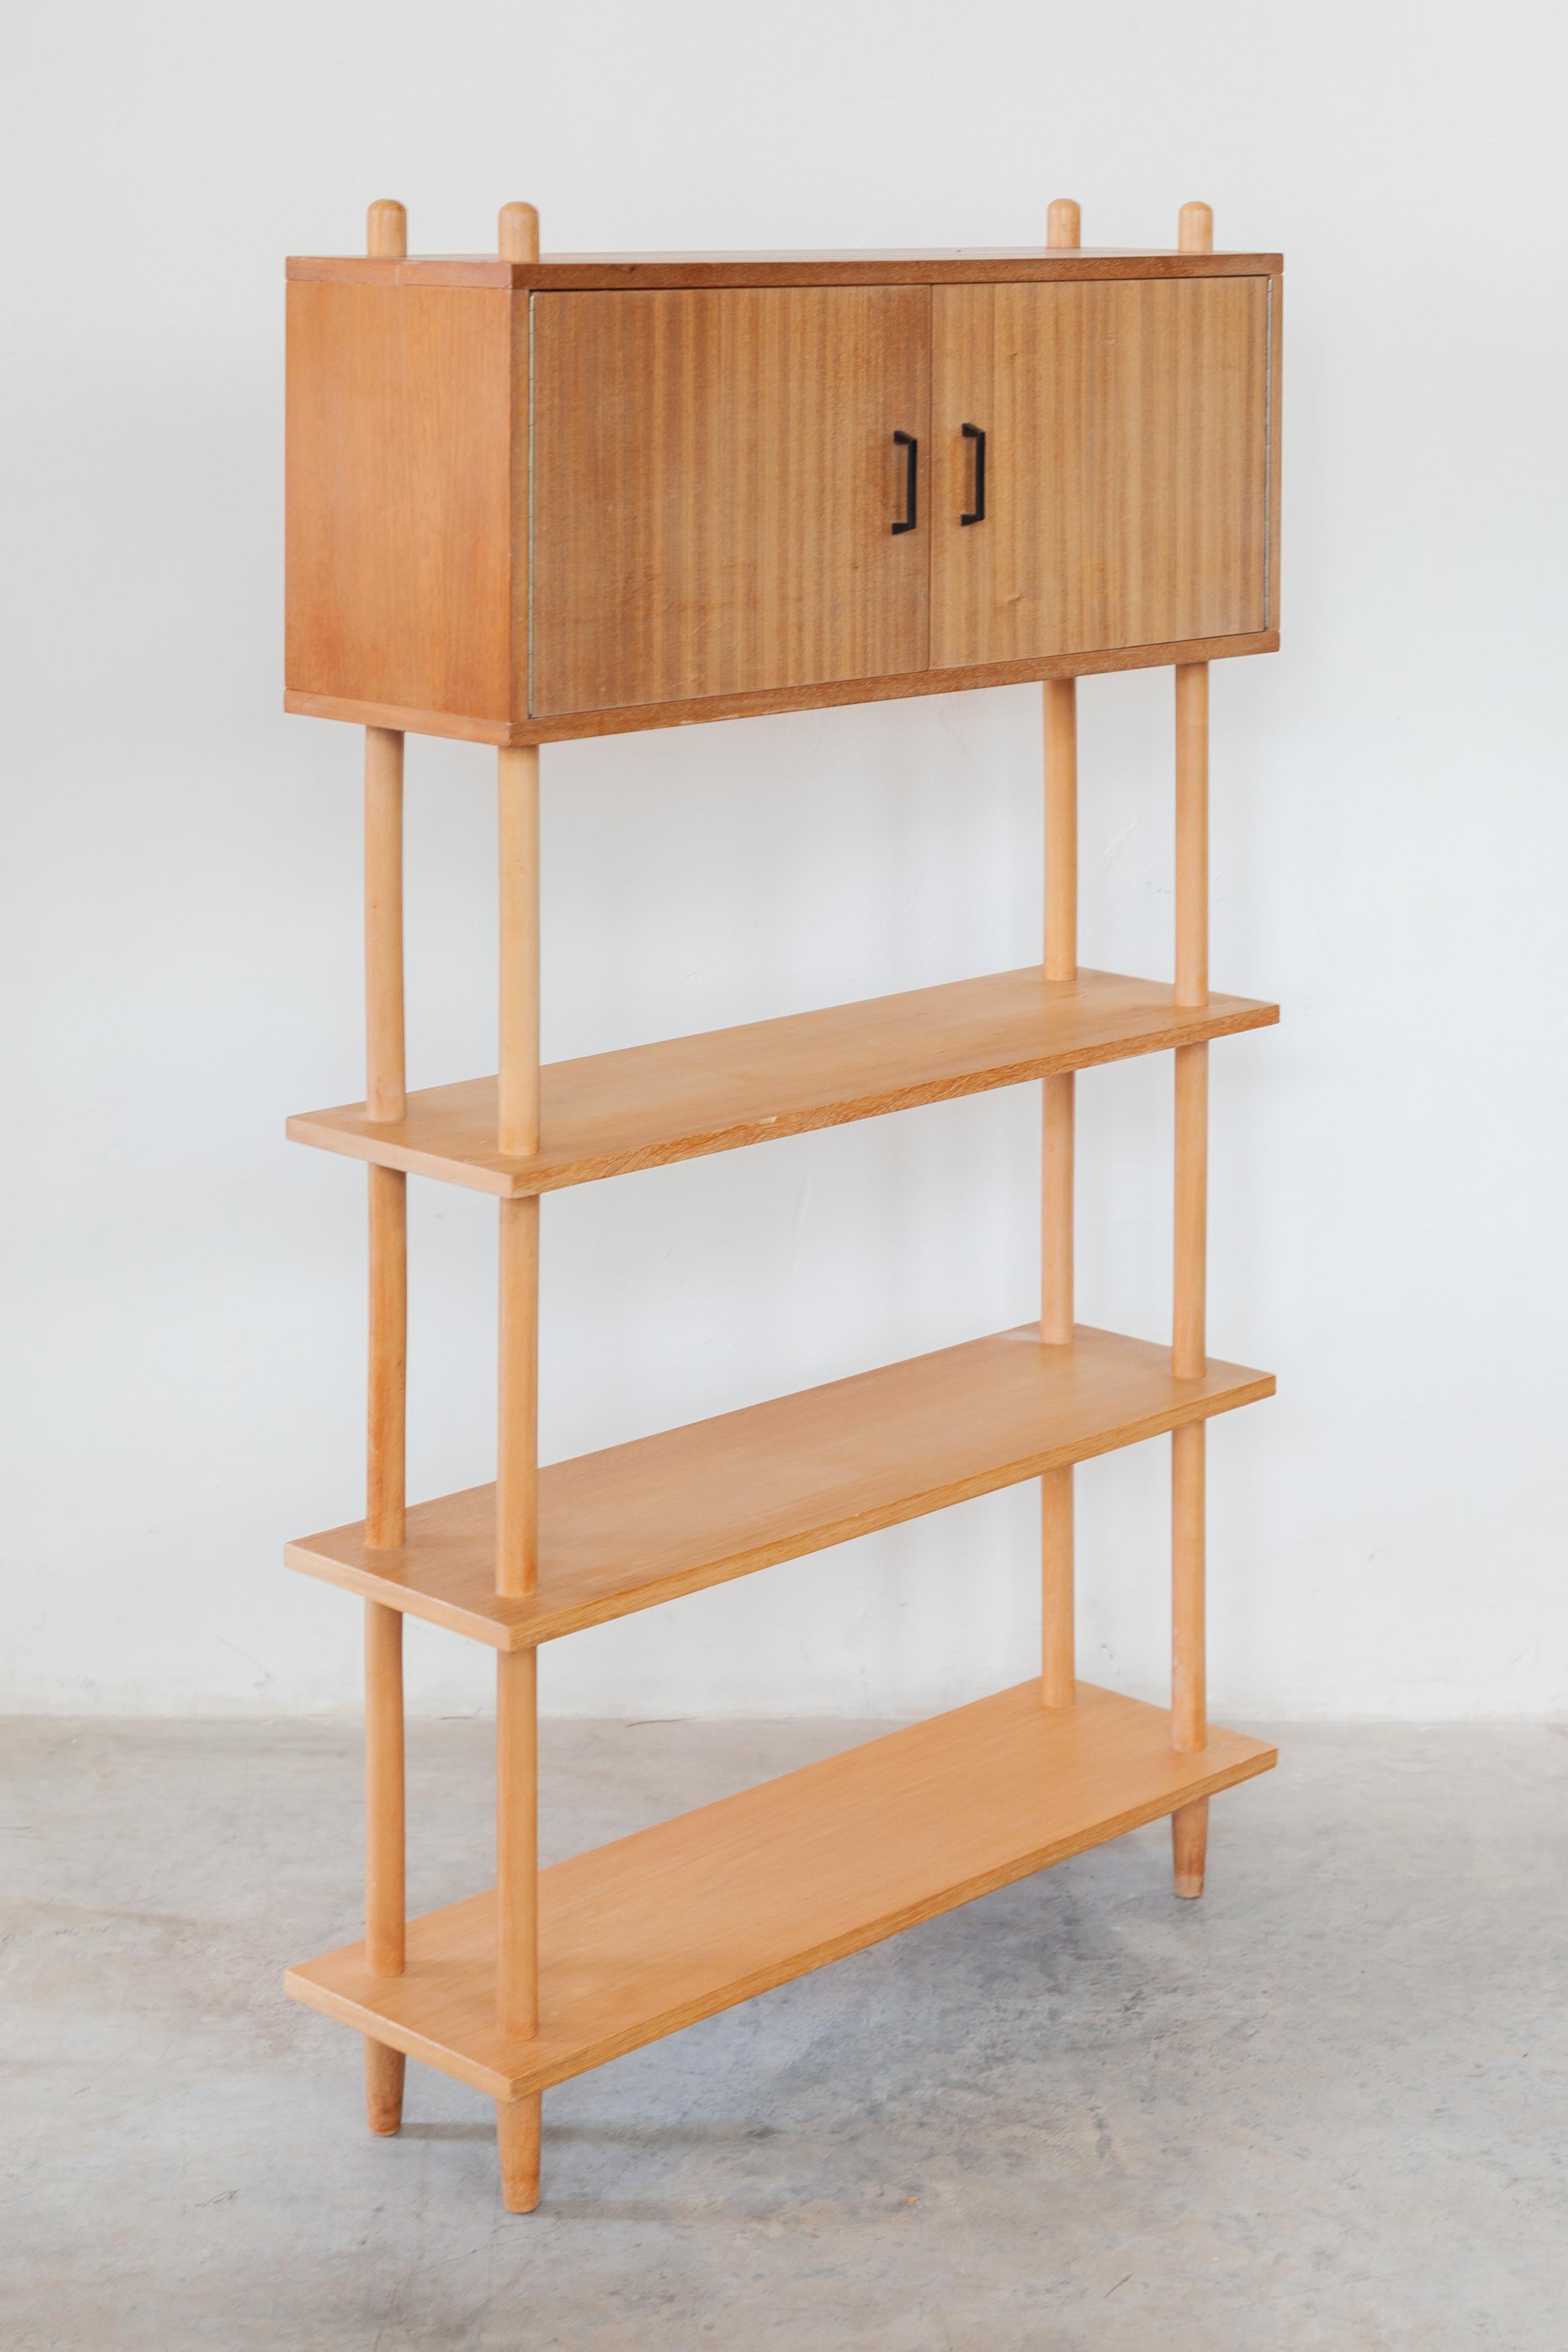 Free standing book stand stick cabinet designed by Lutjens De Boer, The Netherlands 1960s. A special feature of this stick cabinet is the closed compartment, which makes it practical and decorative. Can be used as a cupboard or room divider